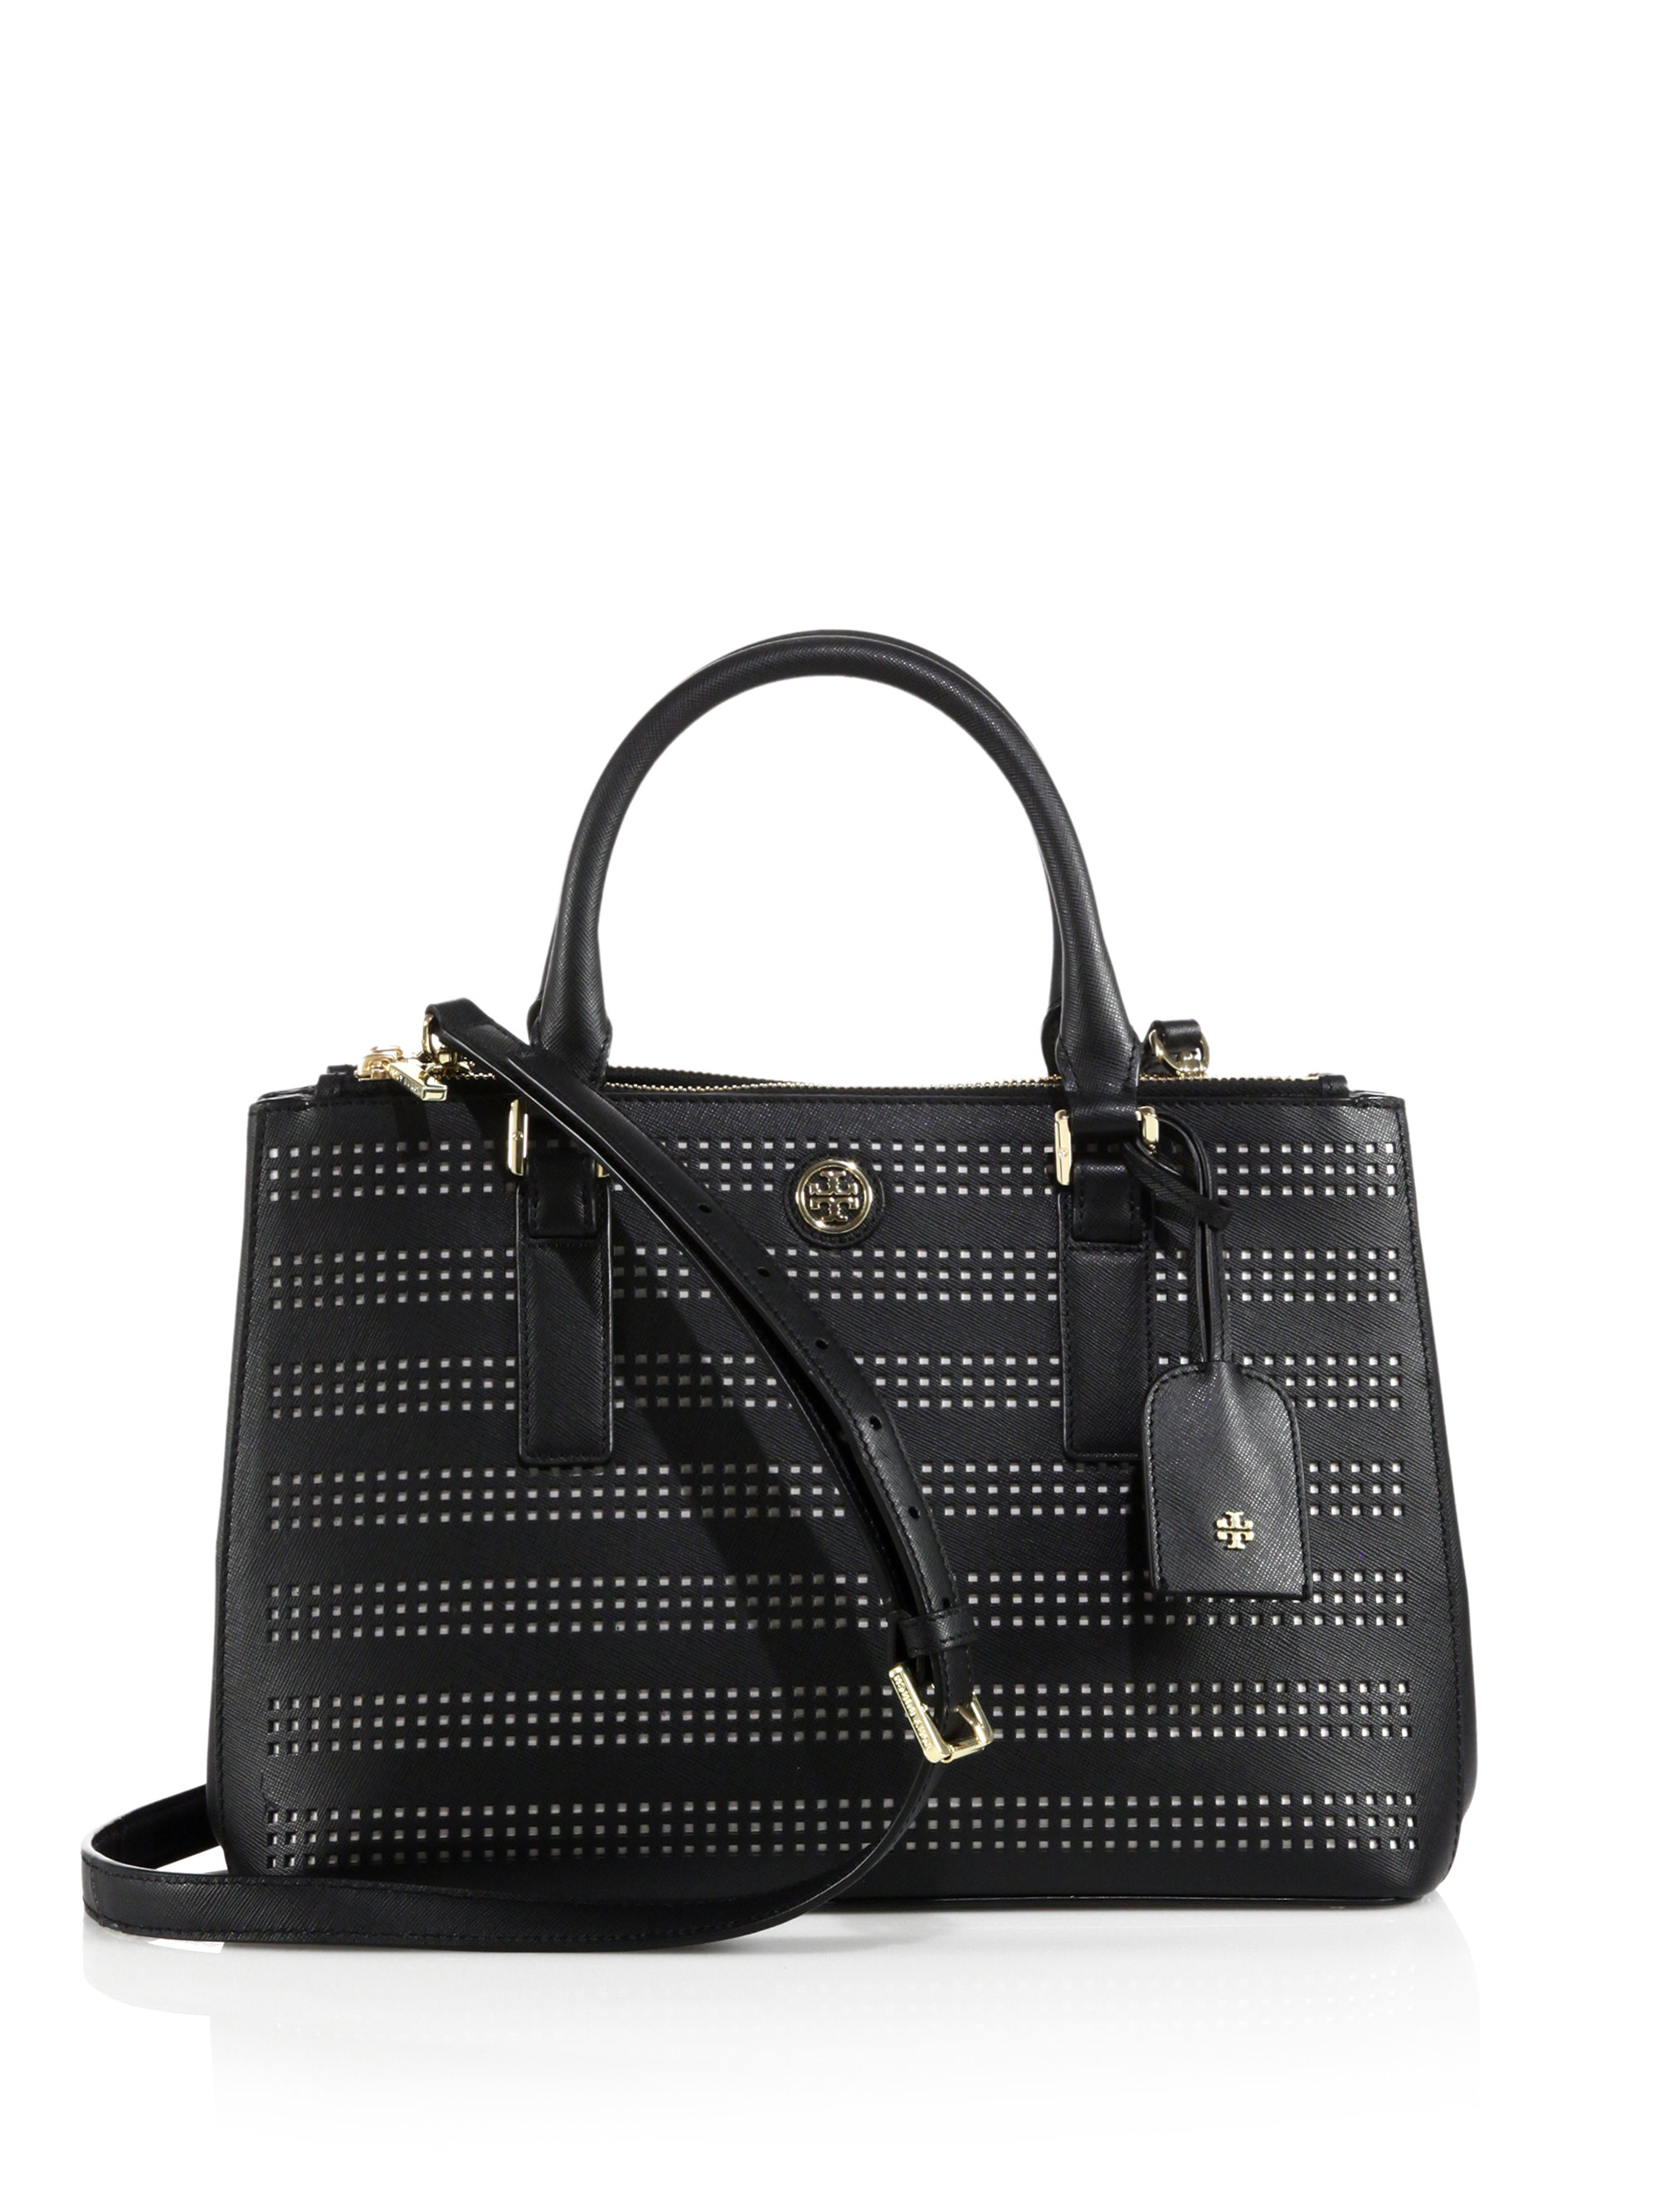 Tory burch Robinson Perforated Mini Double-Zip Tote in Black | Lyst